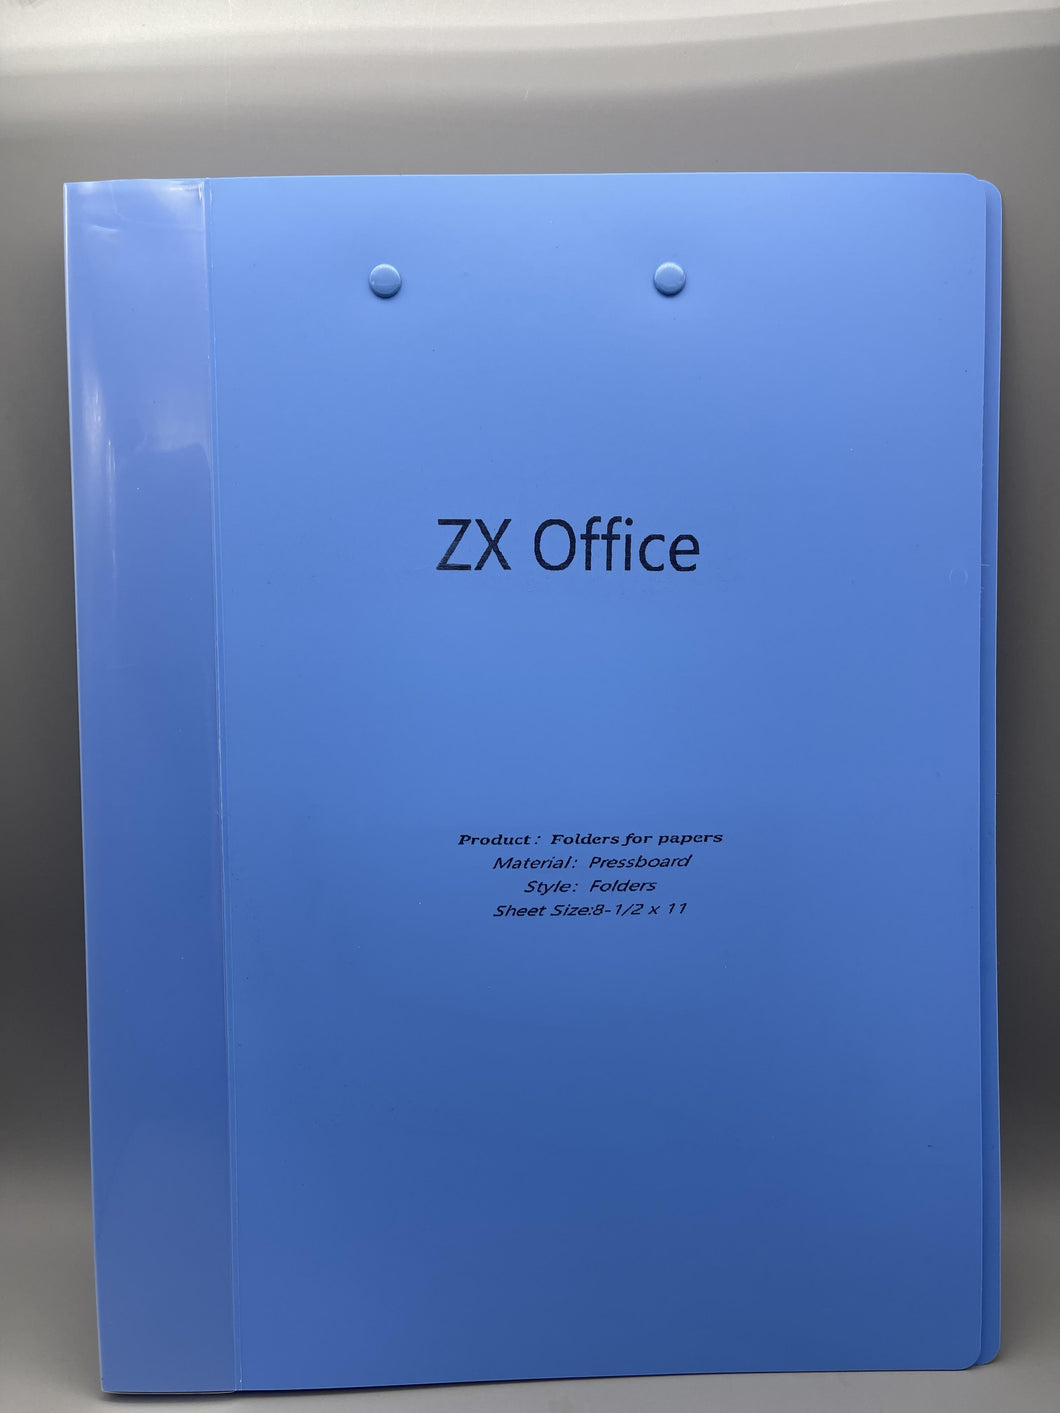 ZX Office Folders for papers,Colored File Folders, Two-Pocket Folders with Three Hole,Letter Size,Suitable for Students and Office Workers,Assorted Colors